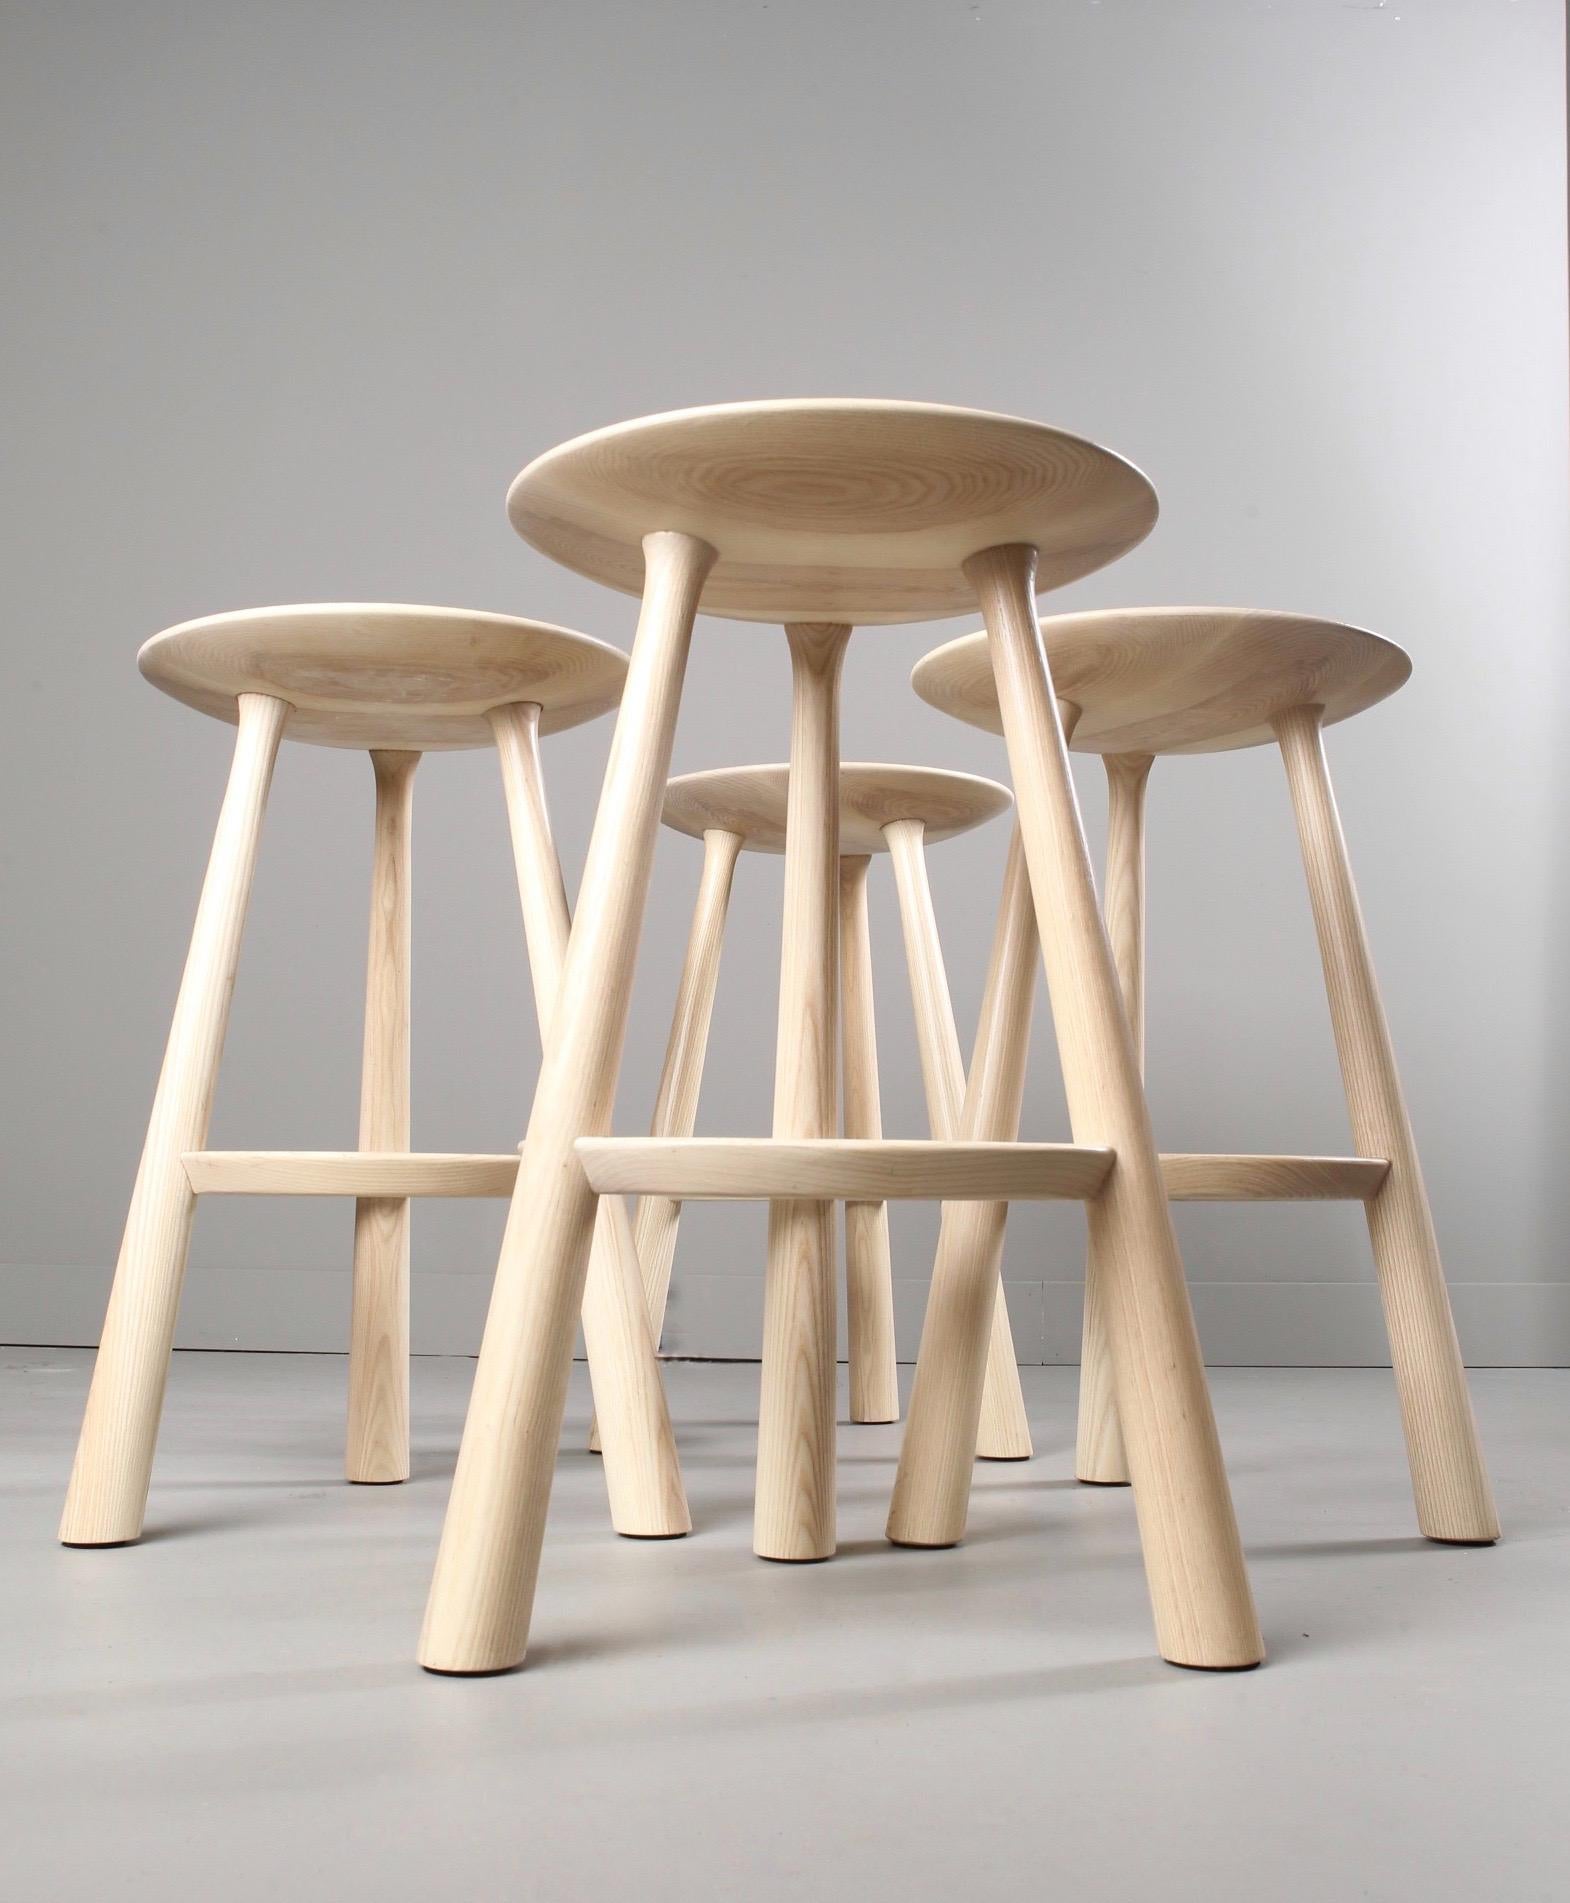 Our FIJN stool with it's oversized, sculpted seat its exceptionally tactile and generous in both form and comfort. 

Wedged tenon joinery highlights traditional craftsmanship, and the footrest, while simple in form requires perfect execution.